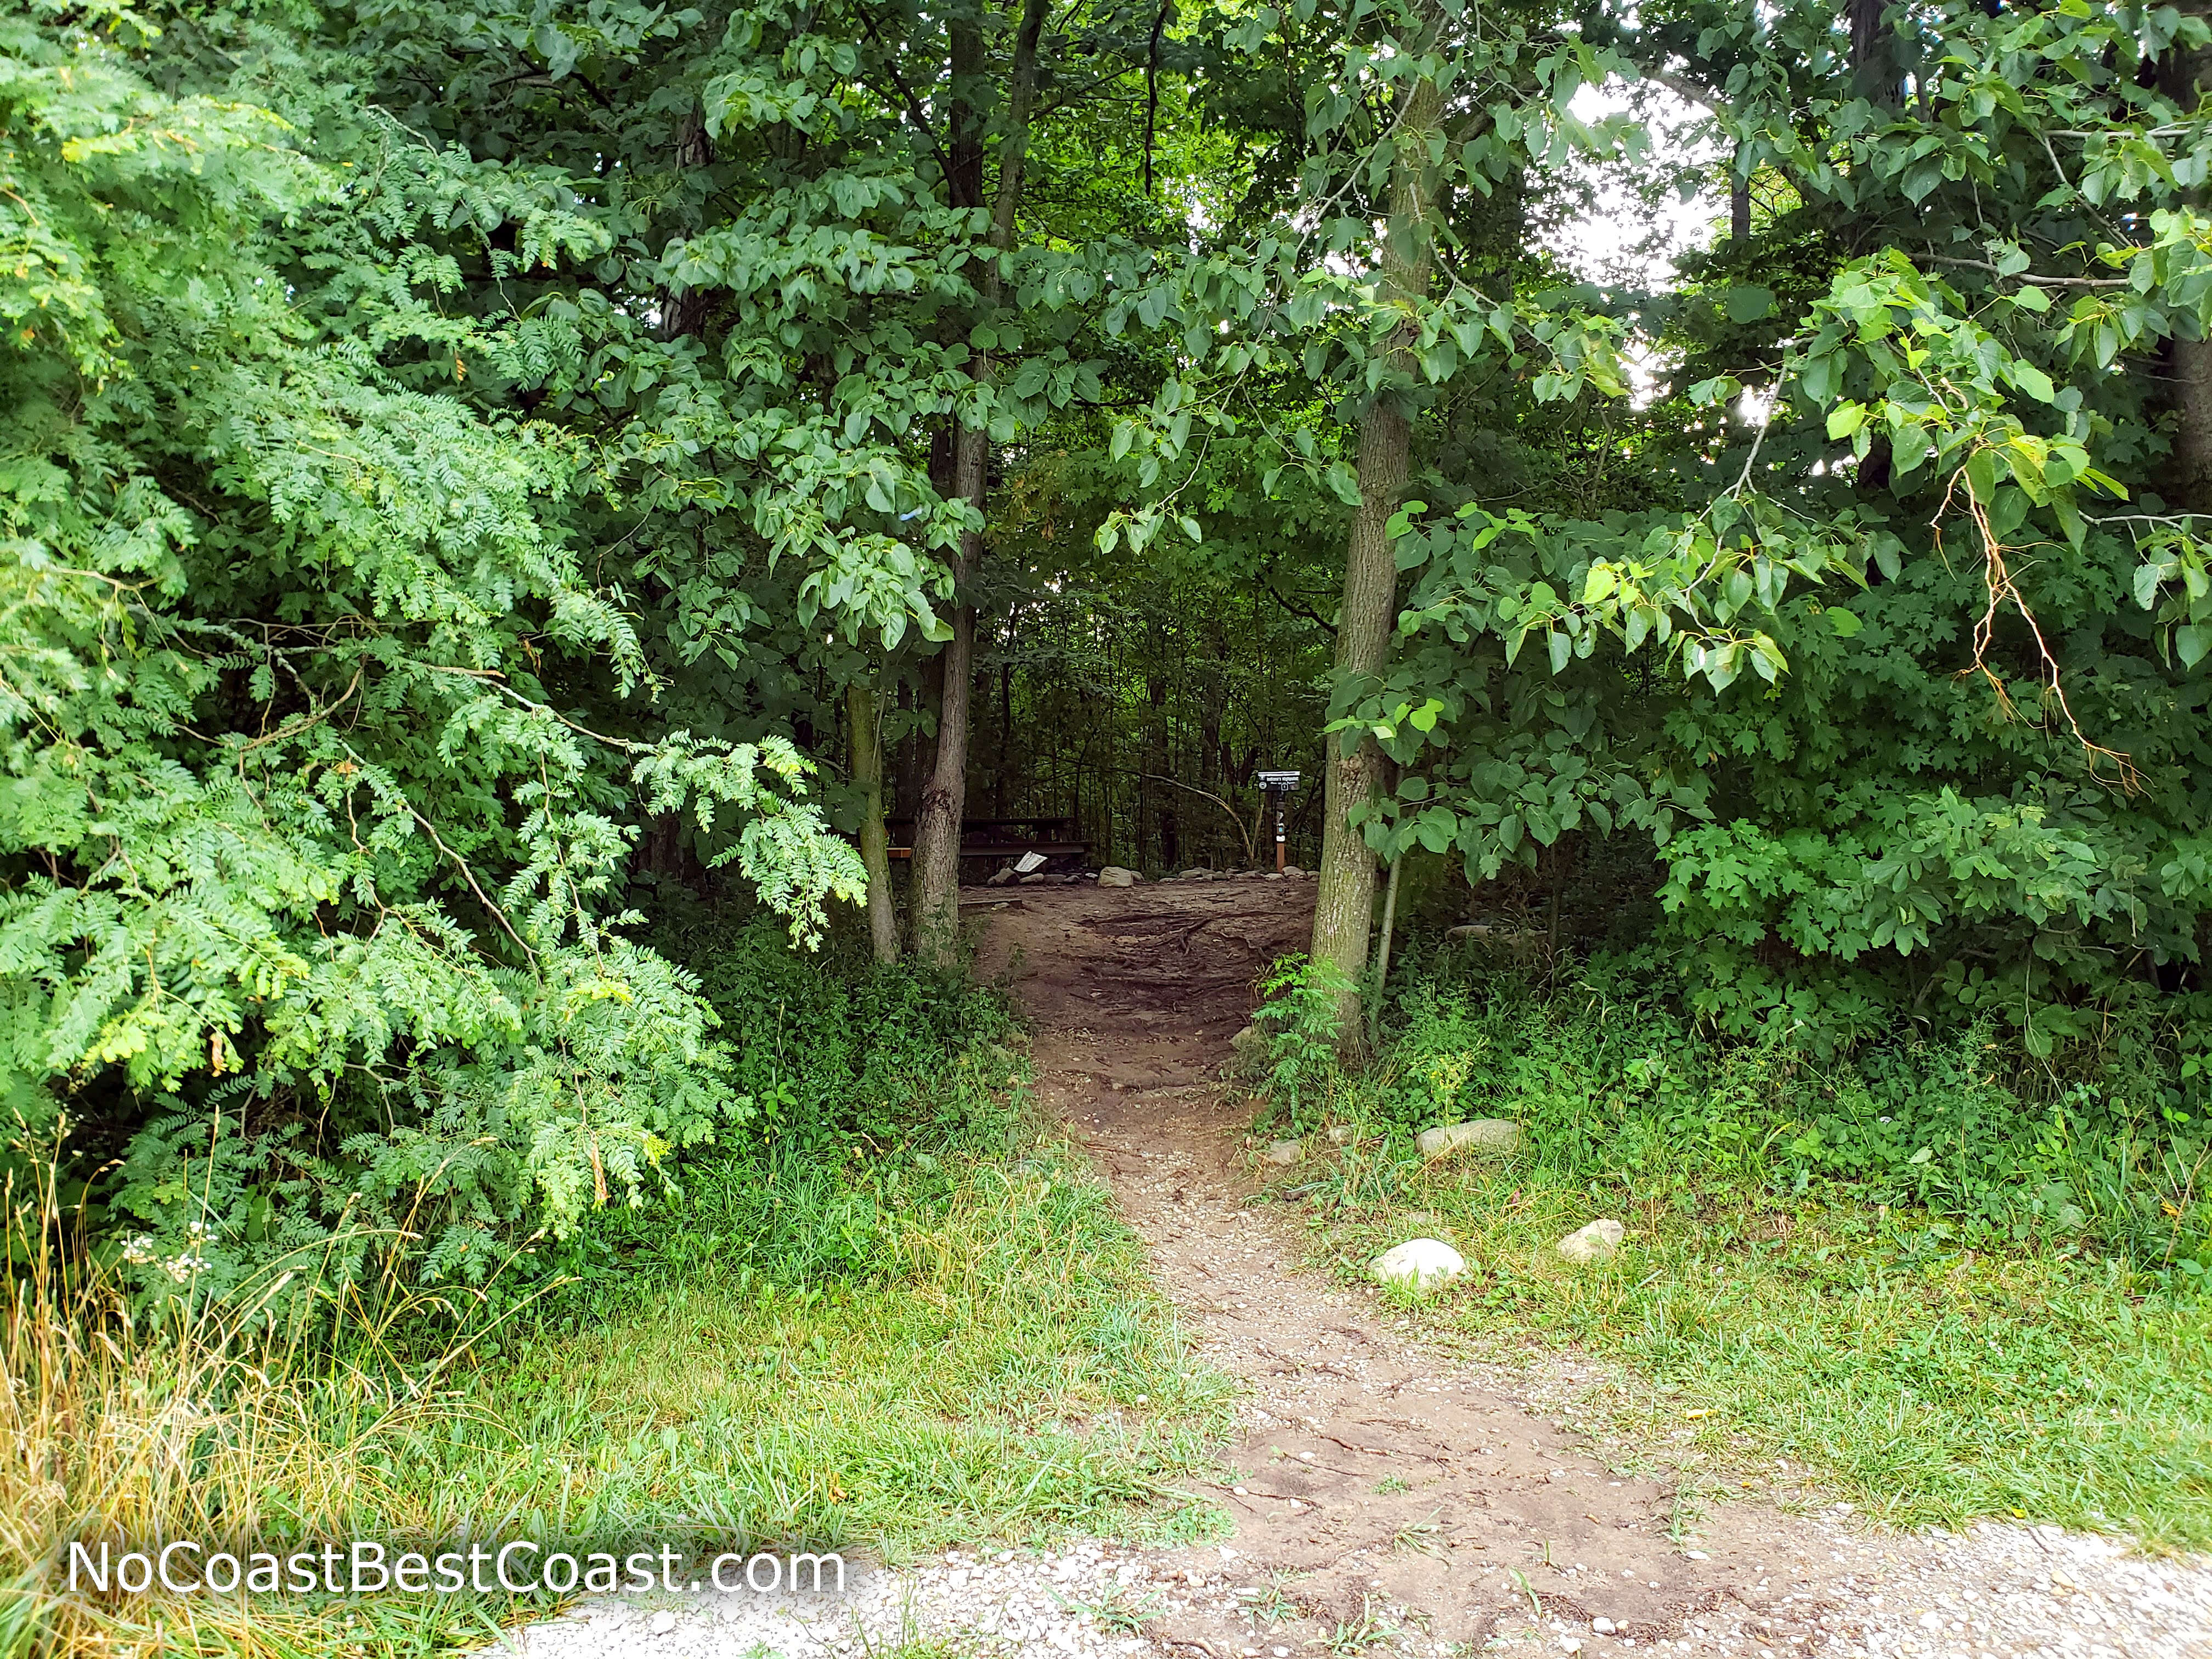 The path leading to the highest place in Indiana